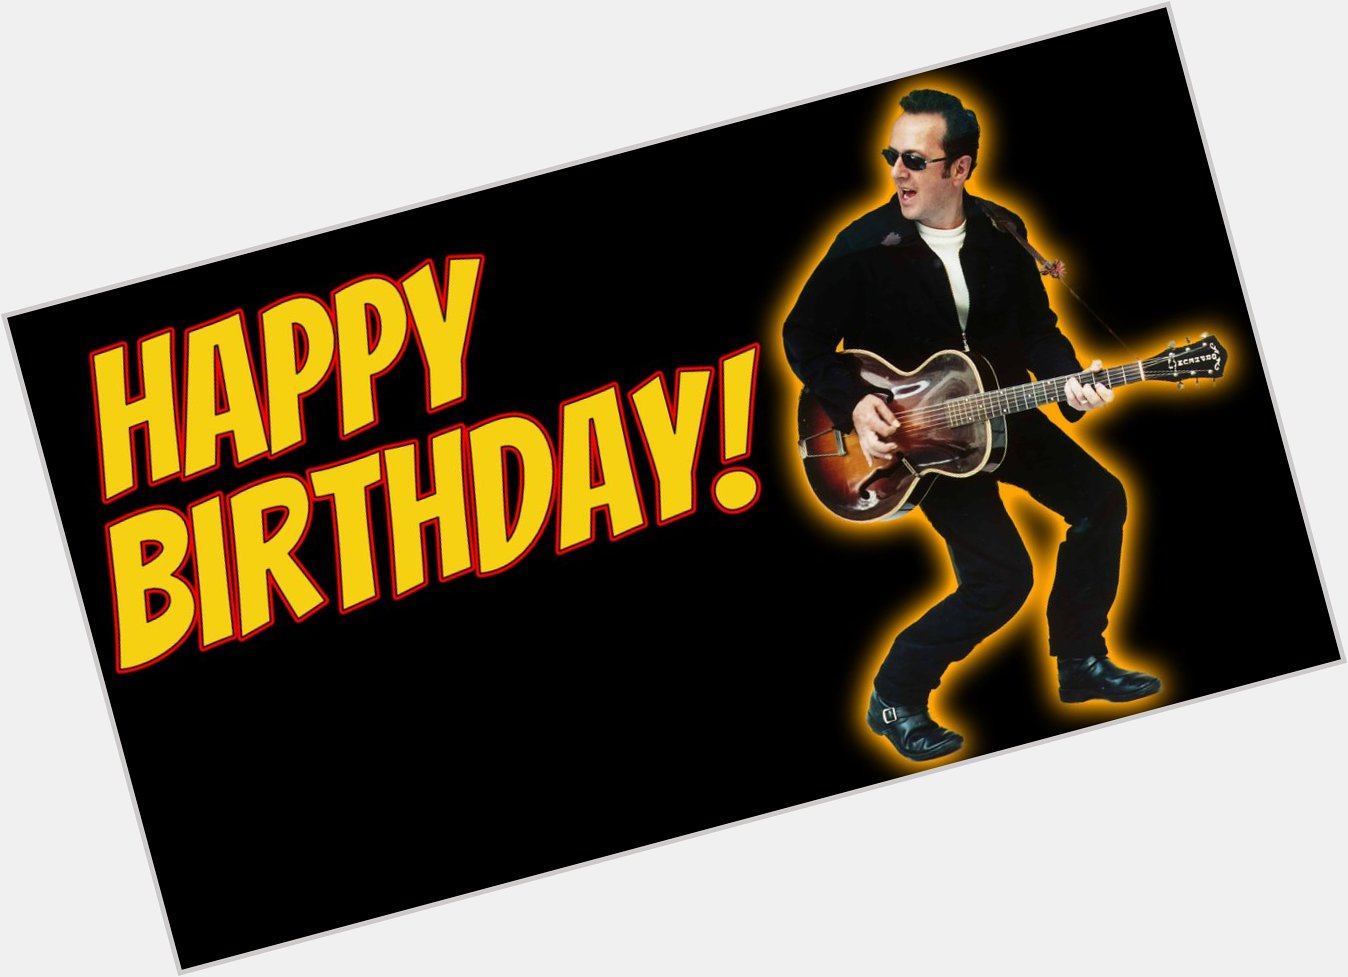 Happy Birthday to the one and only Joe Strummer    